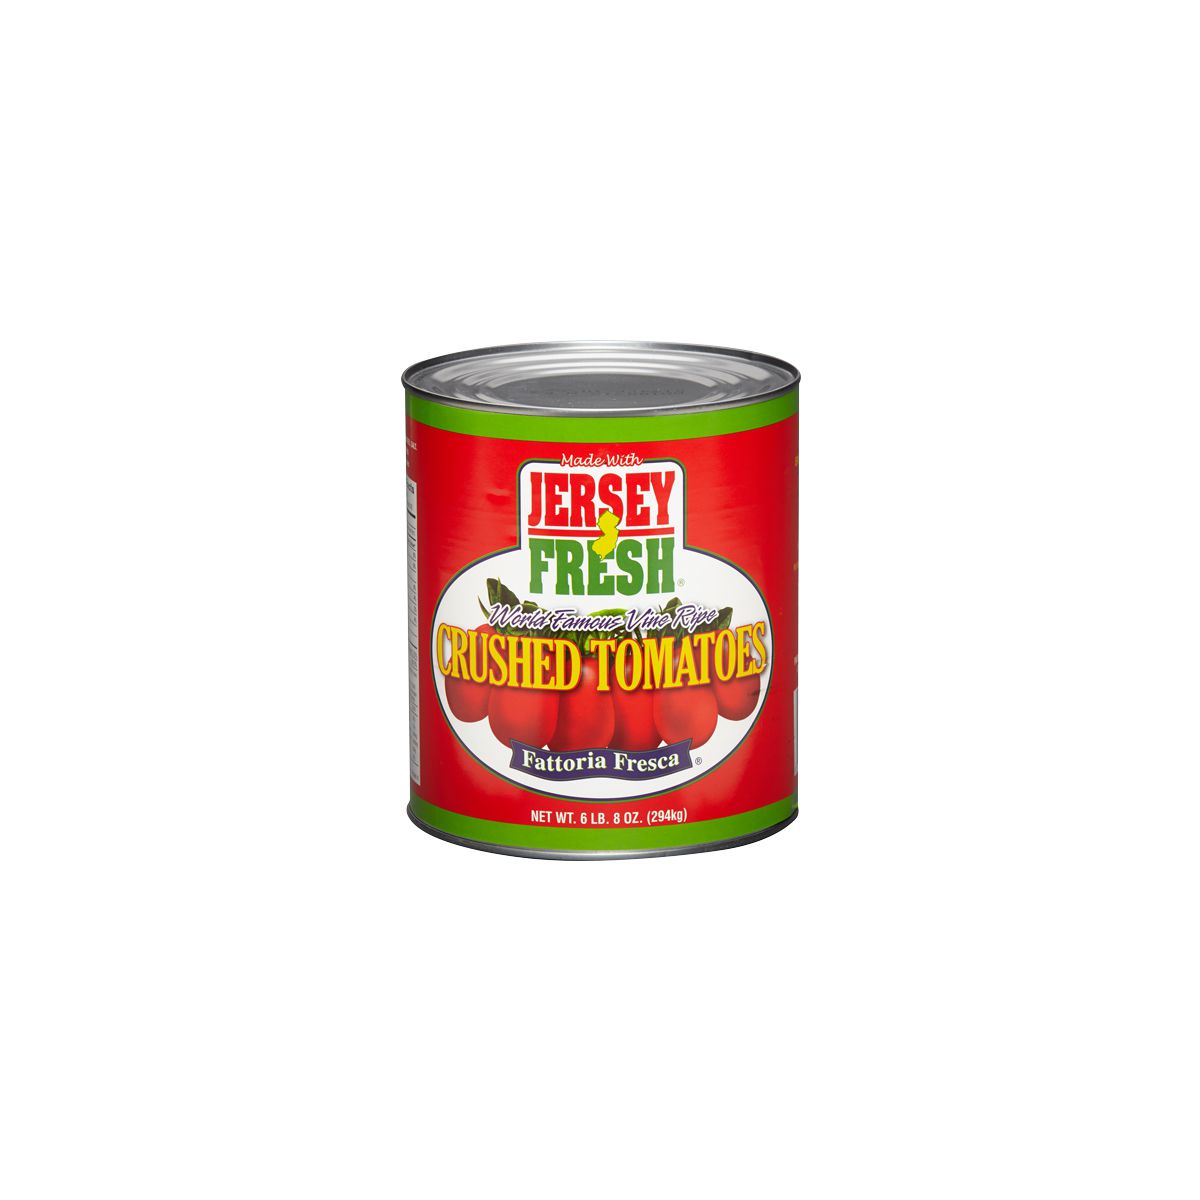 Jersey Fresh Crushed Tomatoes #10